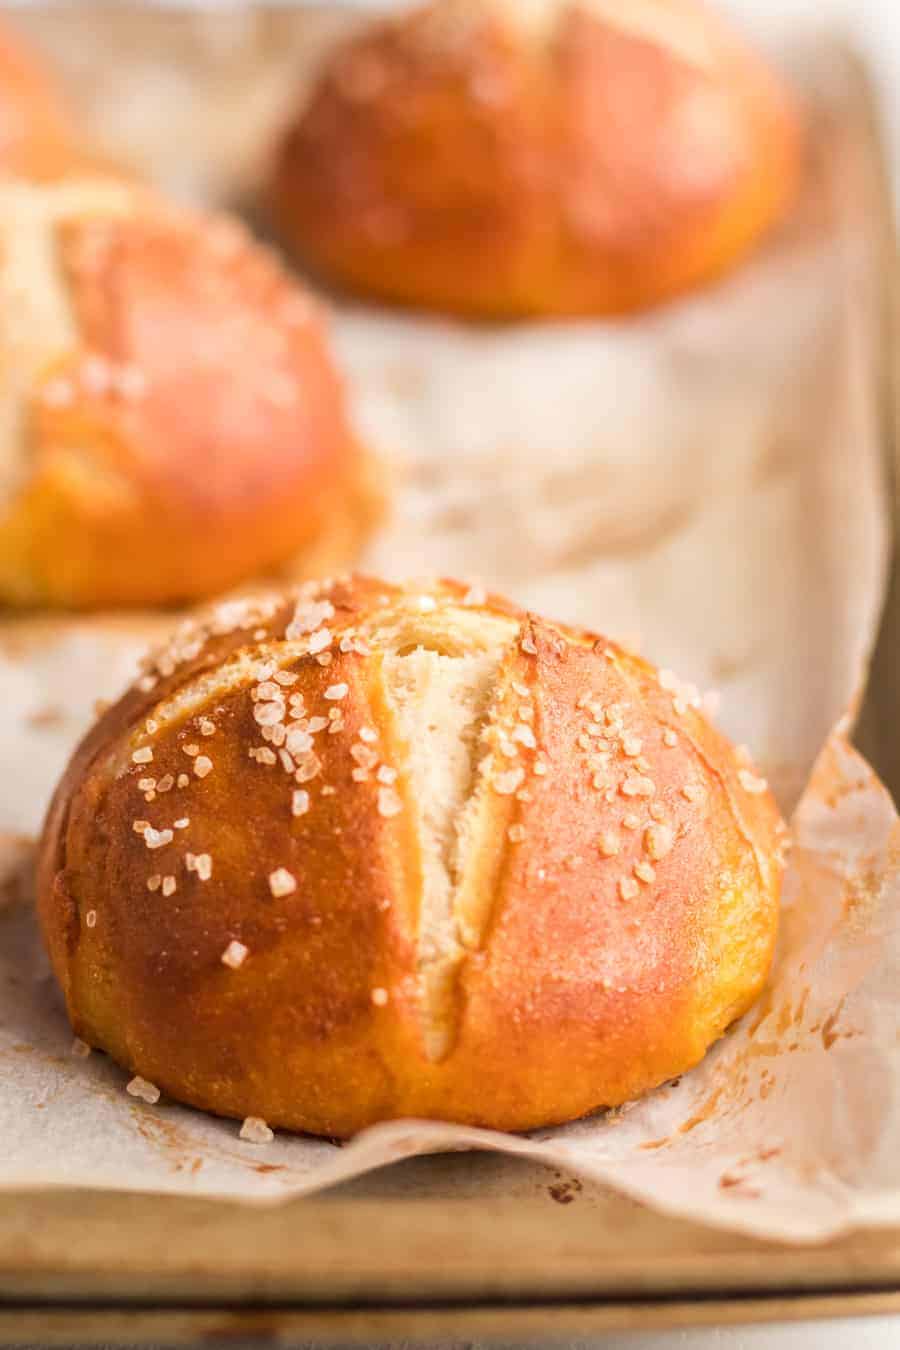 Homemade Pretzel Rolls made with a simple yeast dough that is kneaded until soft, boiled, and then baked into soft and extra chewy pretzel rolls.